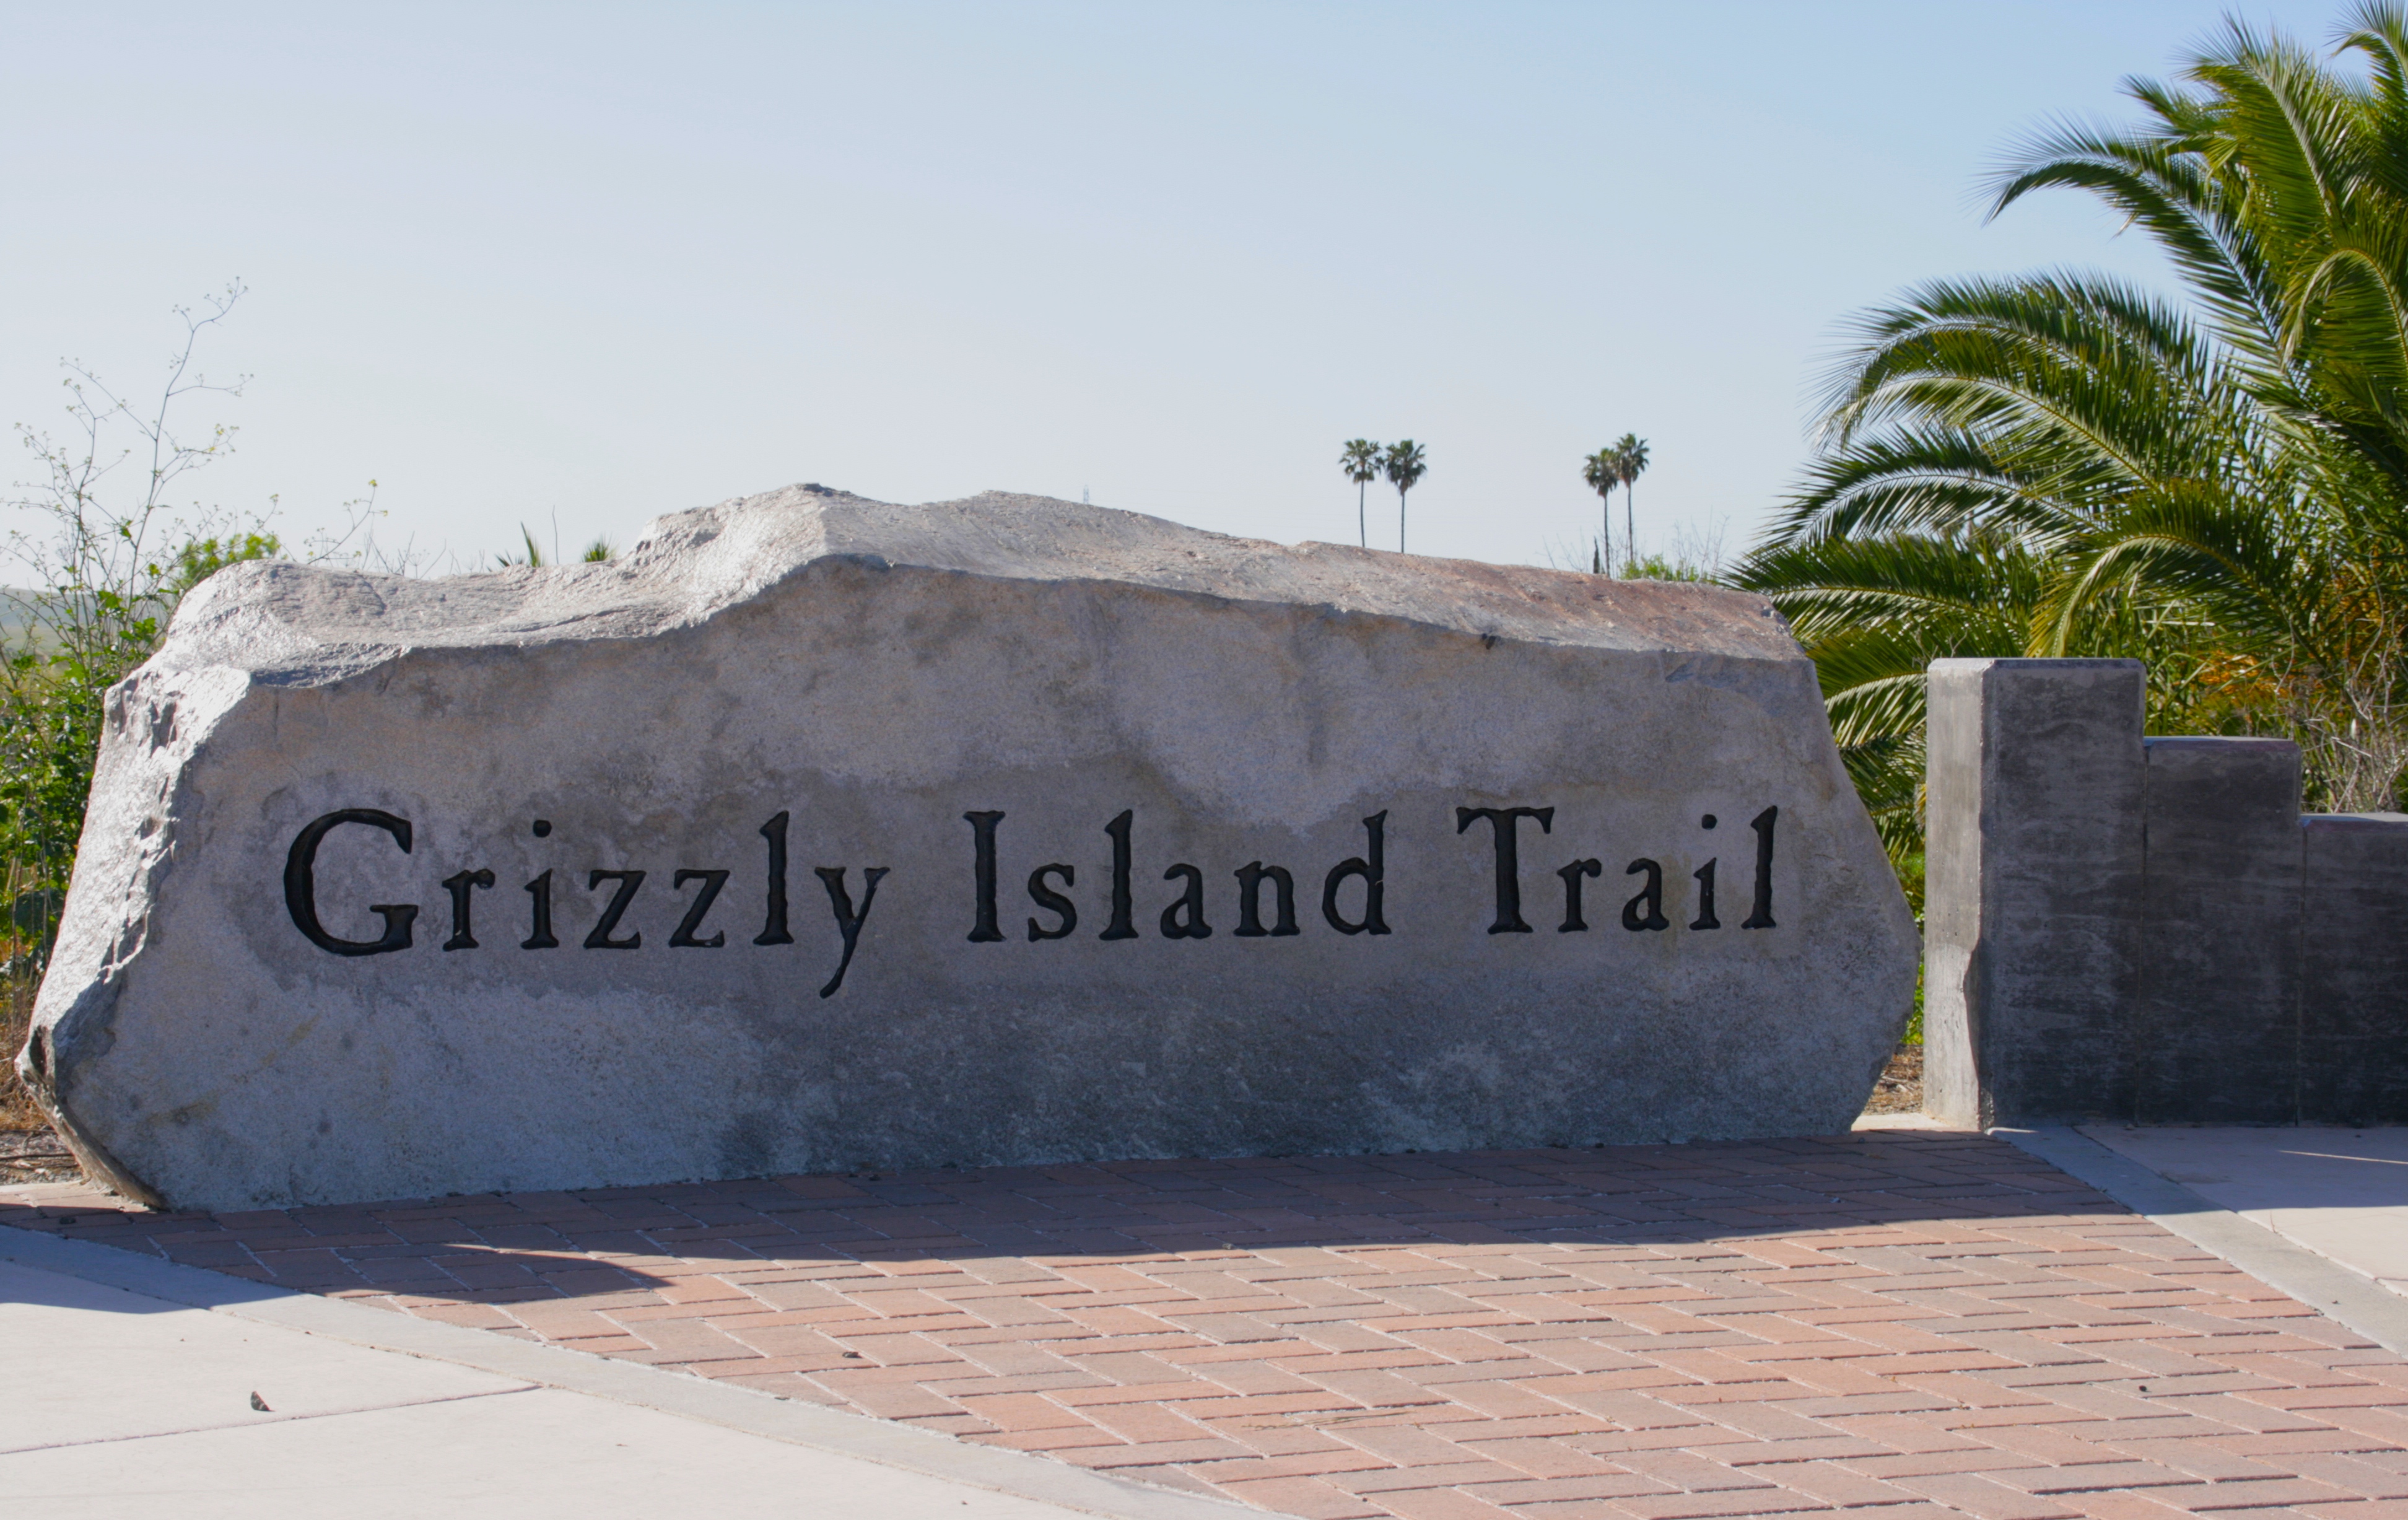 Access to the Grizzly island Trail at the intersection of Marina Blvd. and Rte. 12.